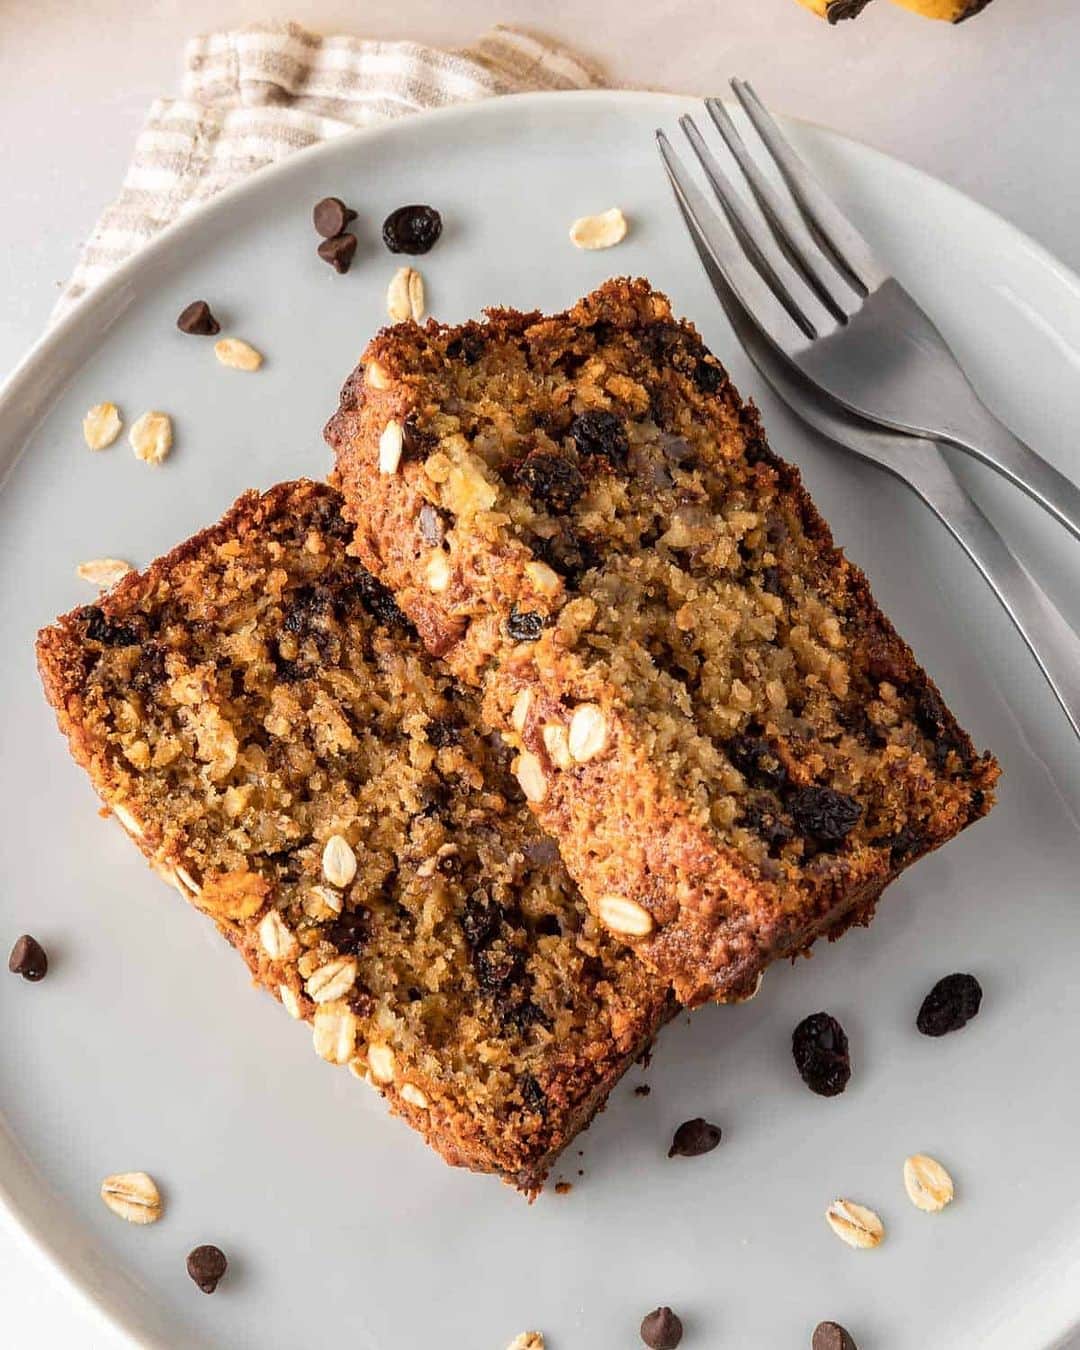 Easy Recipesのインスタグラム：「Healthy Oatmeal Banana Bread is a nutritious and delicious twist on traditional banana bread. The recipe is easy to follow and uses wholesome ingredients like whole oats and honey instead of refined sugar. Not only is this easy banana oatmeal bread a tasty treat, but it’s also a great way to start your day!   Full recipe link in my bio @cookinwithmima  https://www.cookinwithmima.com/oatmeal-banana-bread/」